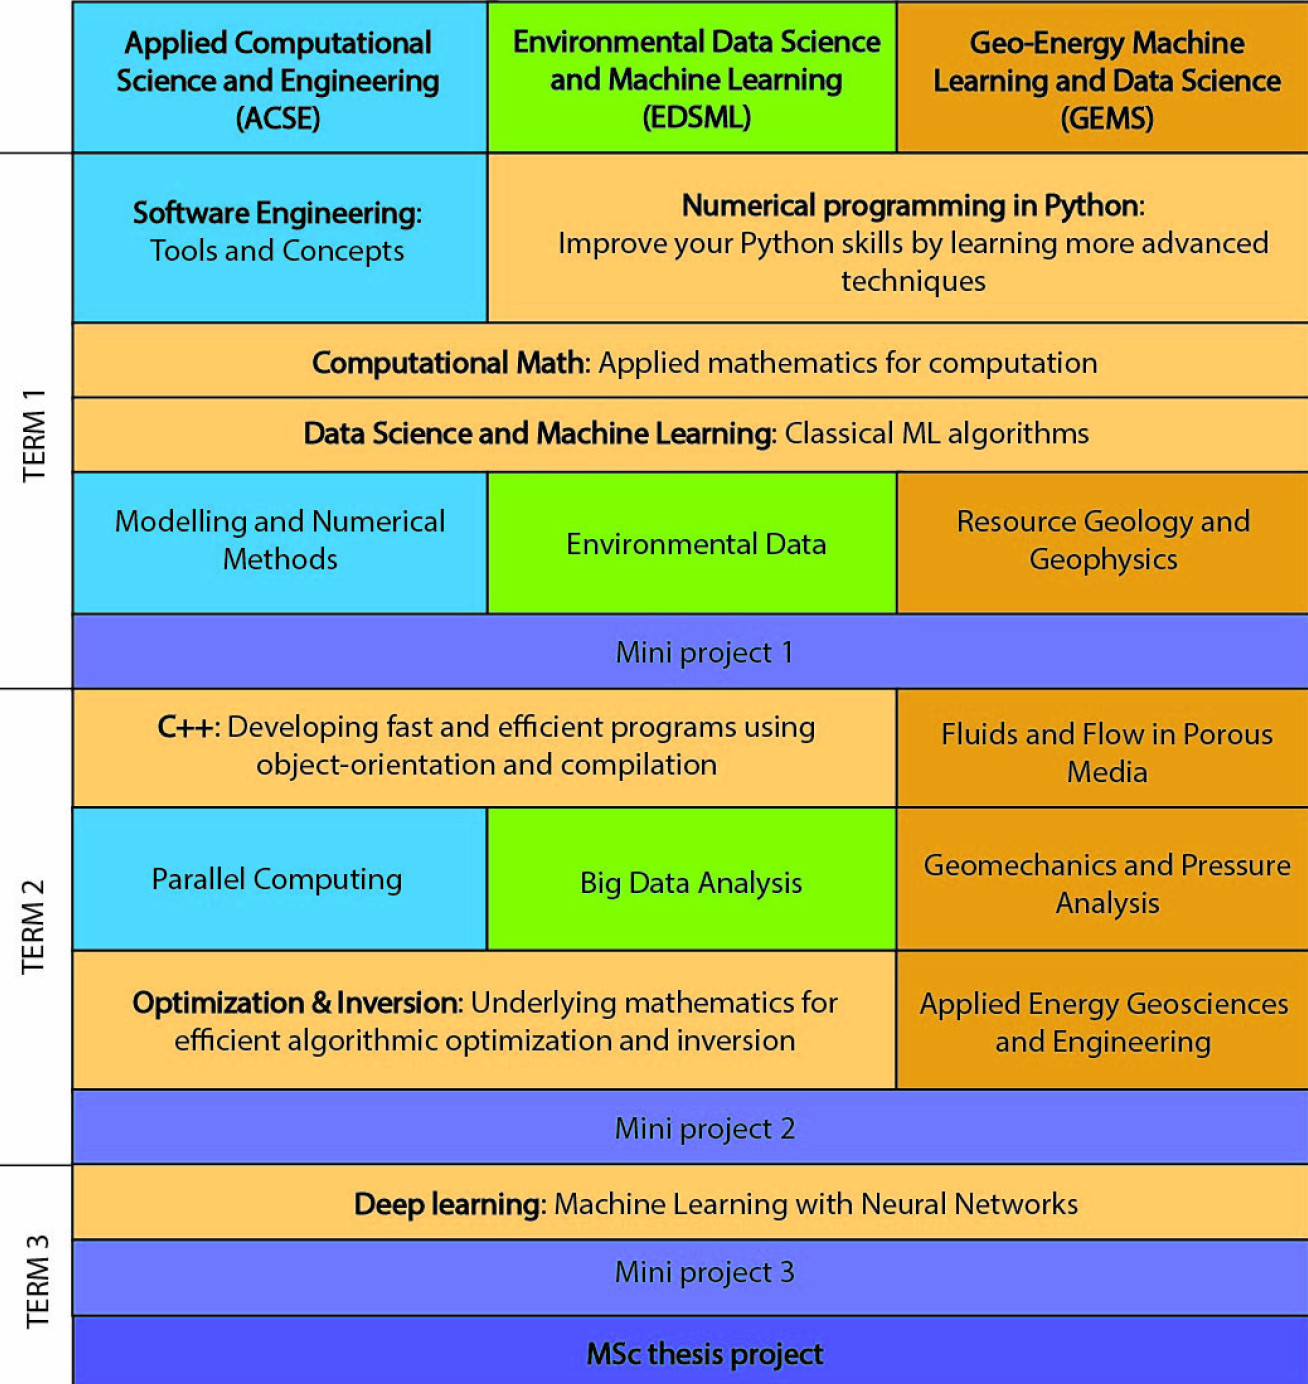 Courses shared by ACSE, EDSML, and GEMS (ESE MScs)